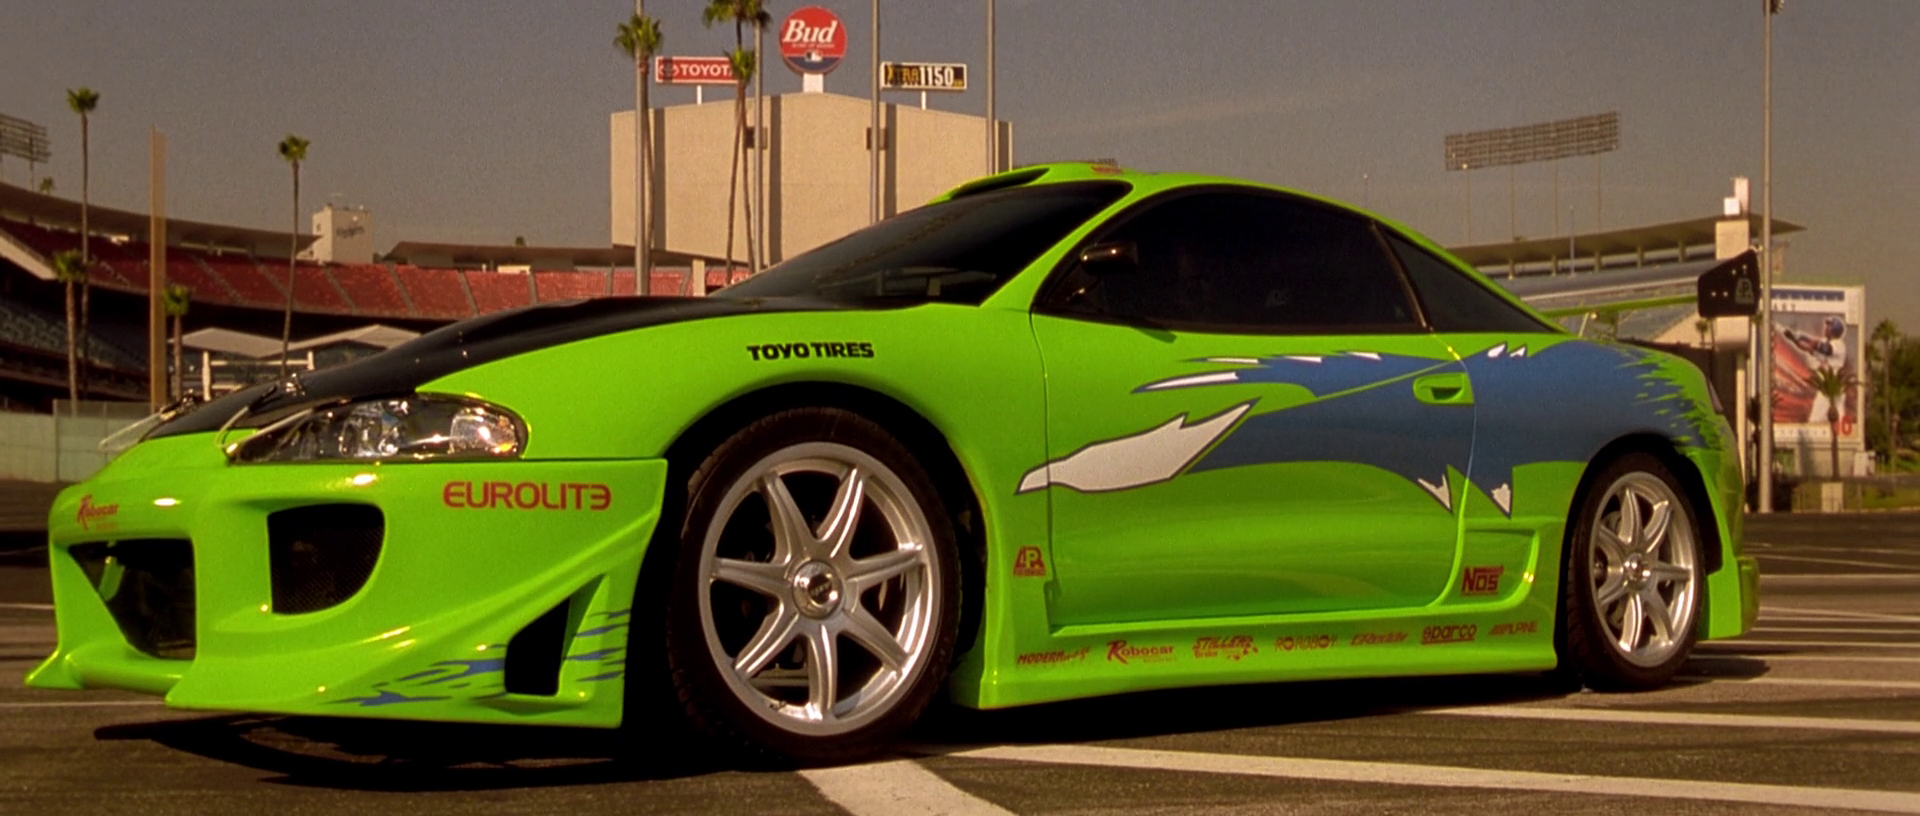 Iconic Green 1995 Mitsubishi Eclipse from Fast and Furious Front 3/4 View